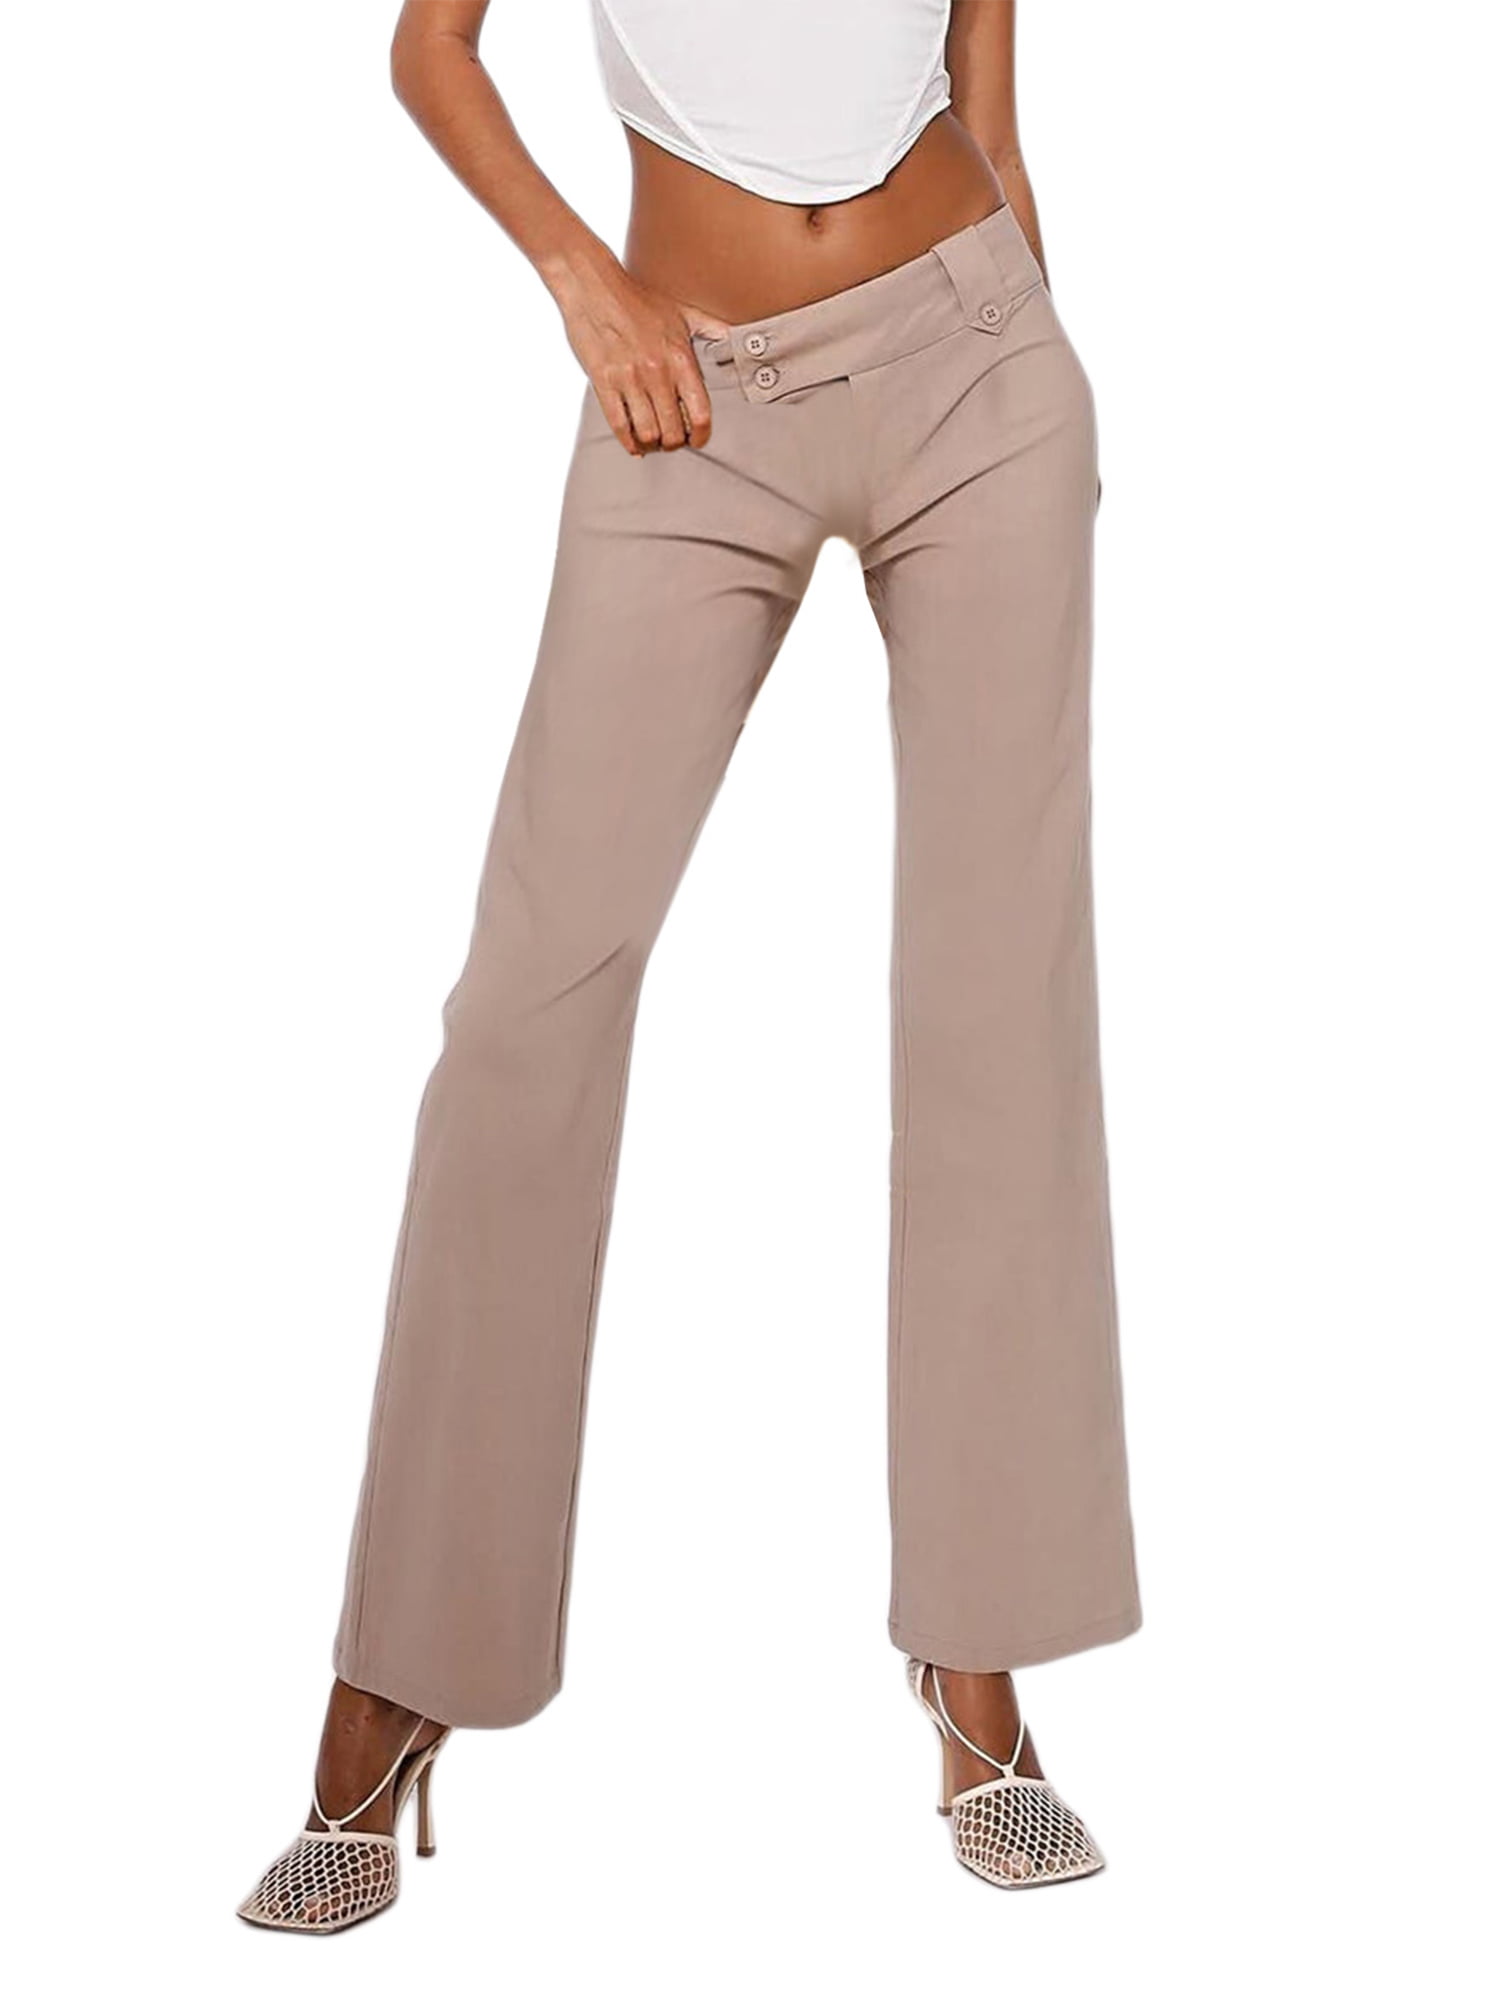 wdehow Women's Pants, Adult Casual Solid Color Low Waist Slightly Flared  Pants Female Trousers